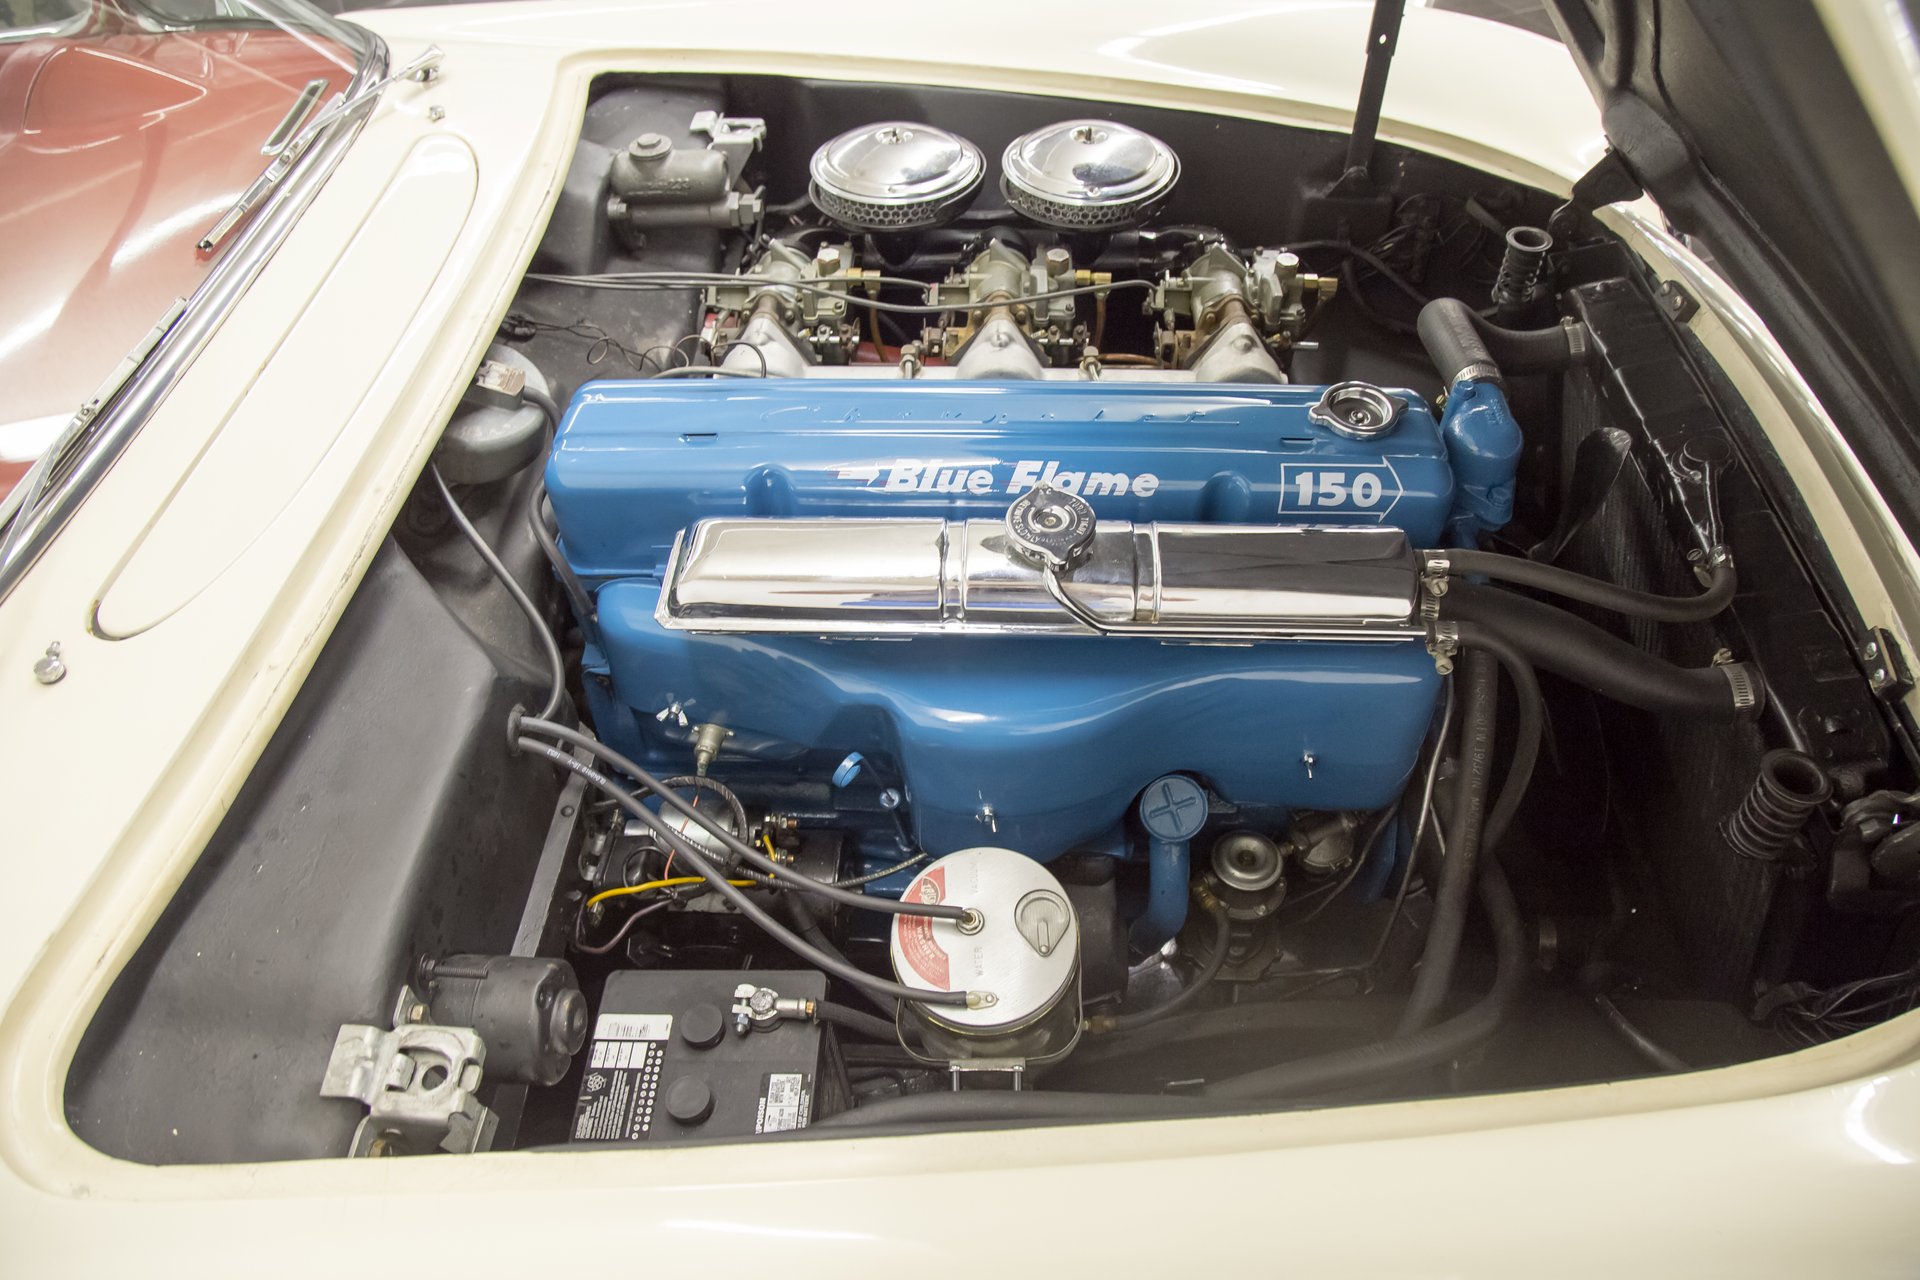 The 1954 "Blue Flame" Six Cylinder